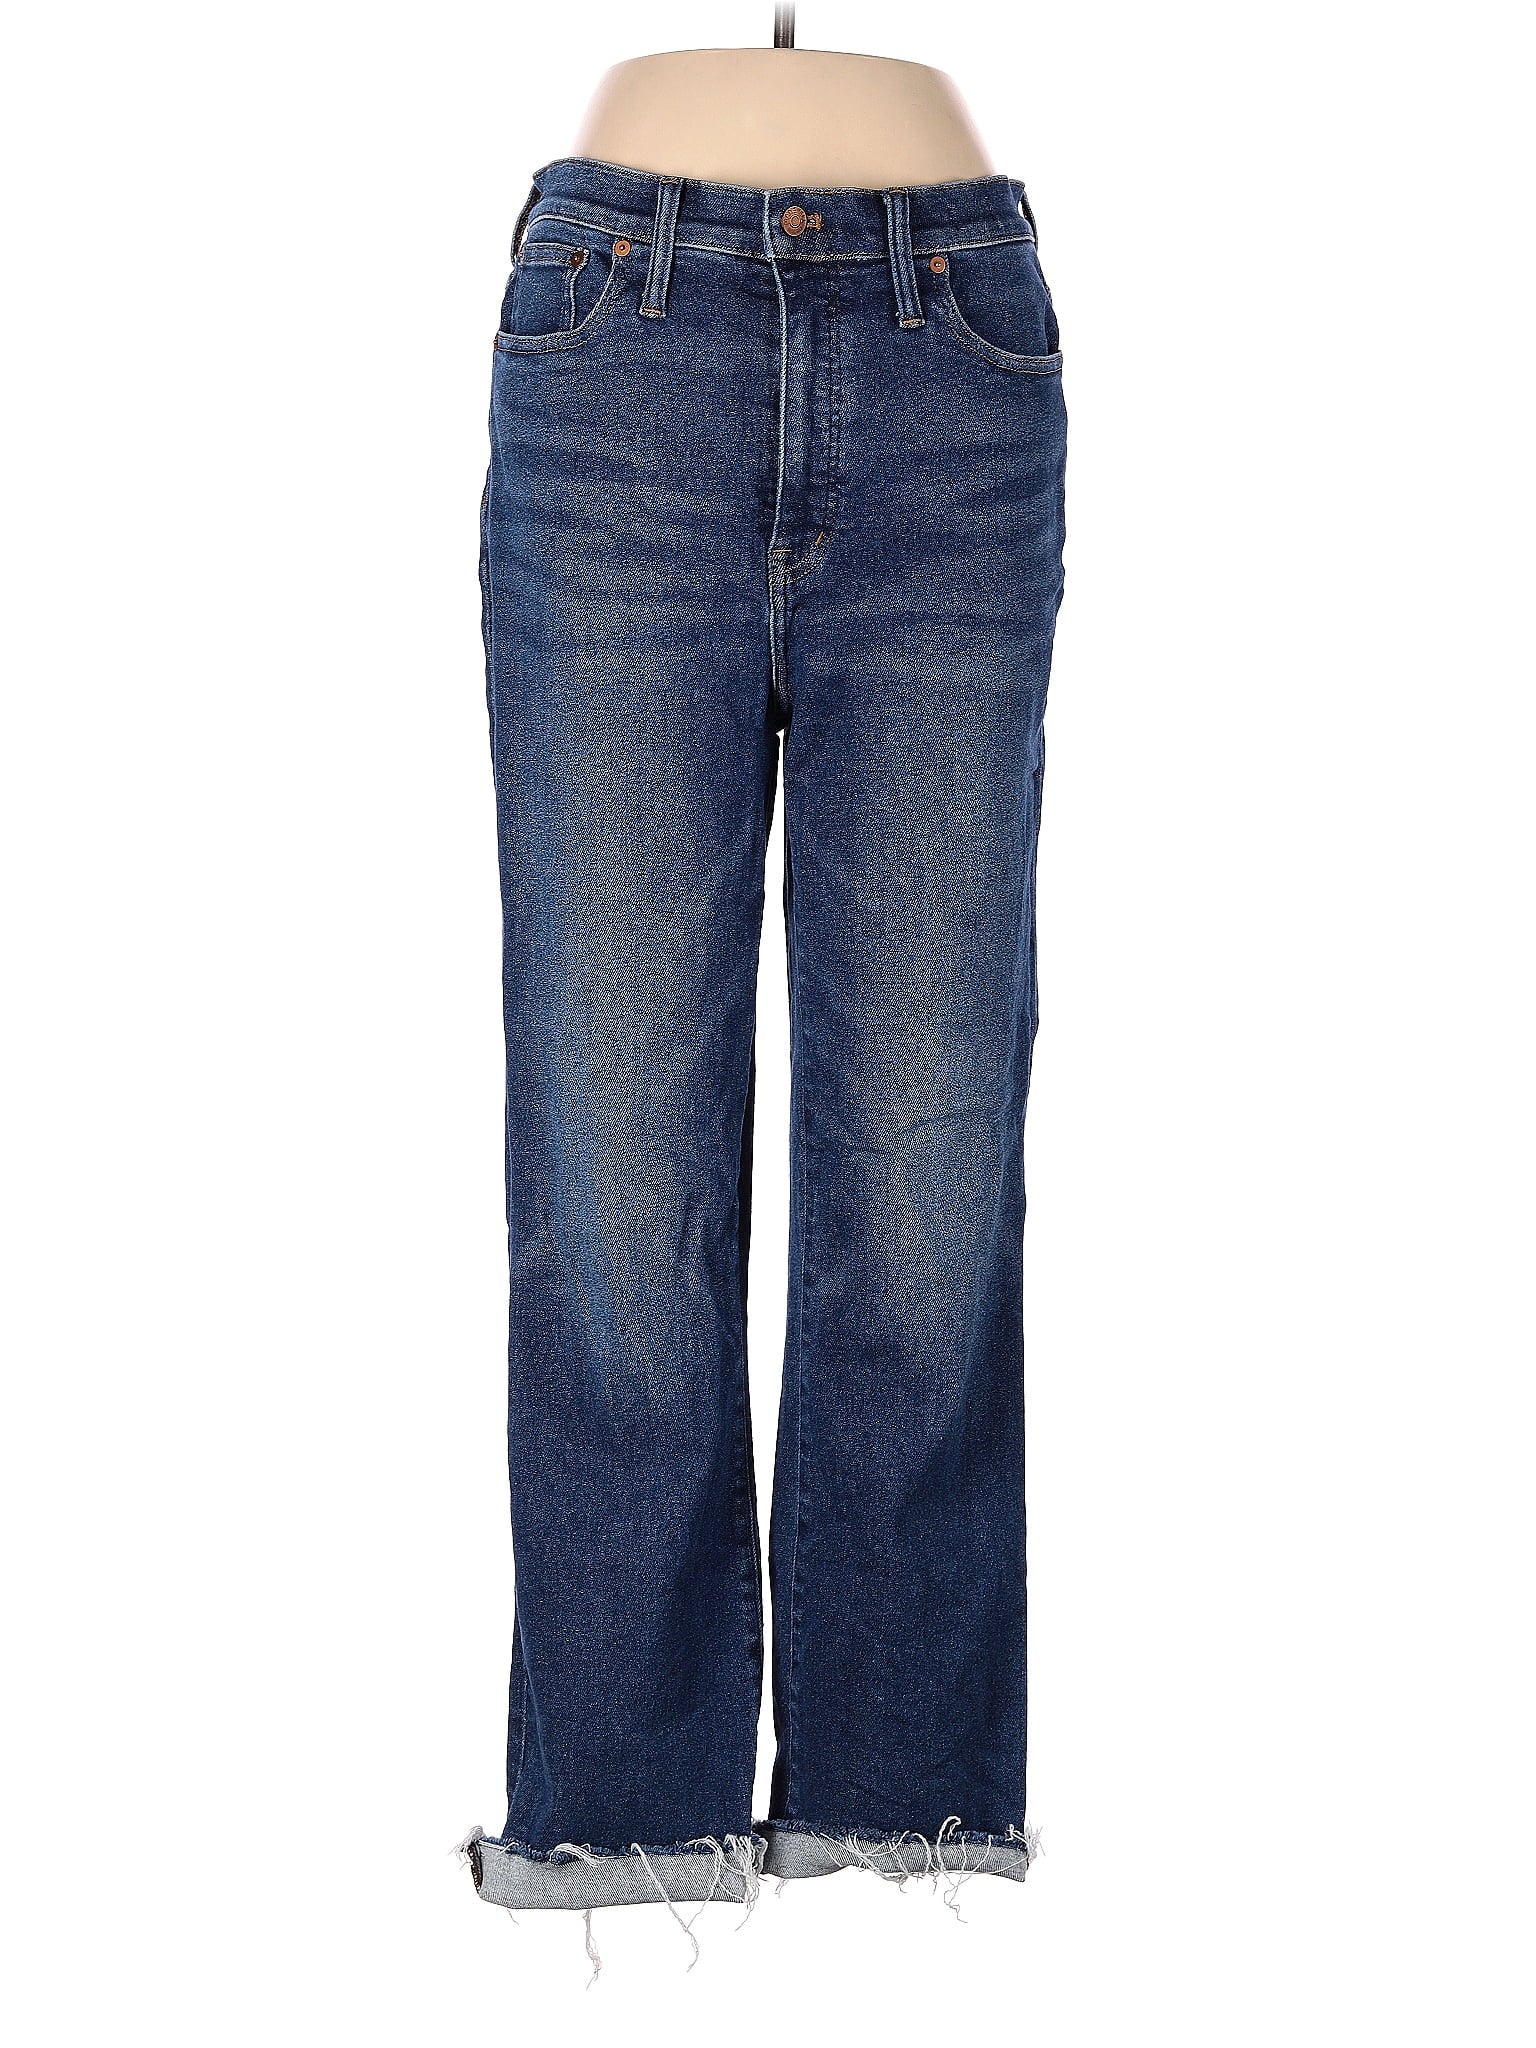 High-Rise Tall Cali Demi-Boot Jeans In Smithley Wash waist size - 29 T